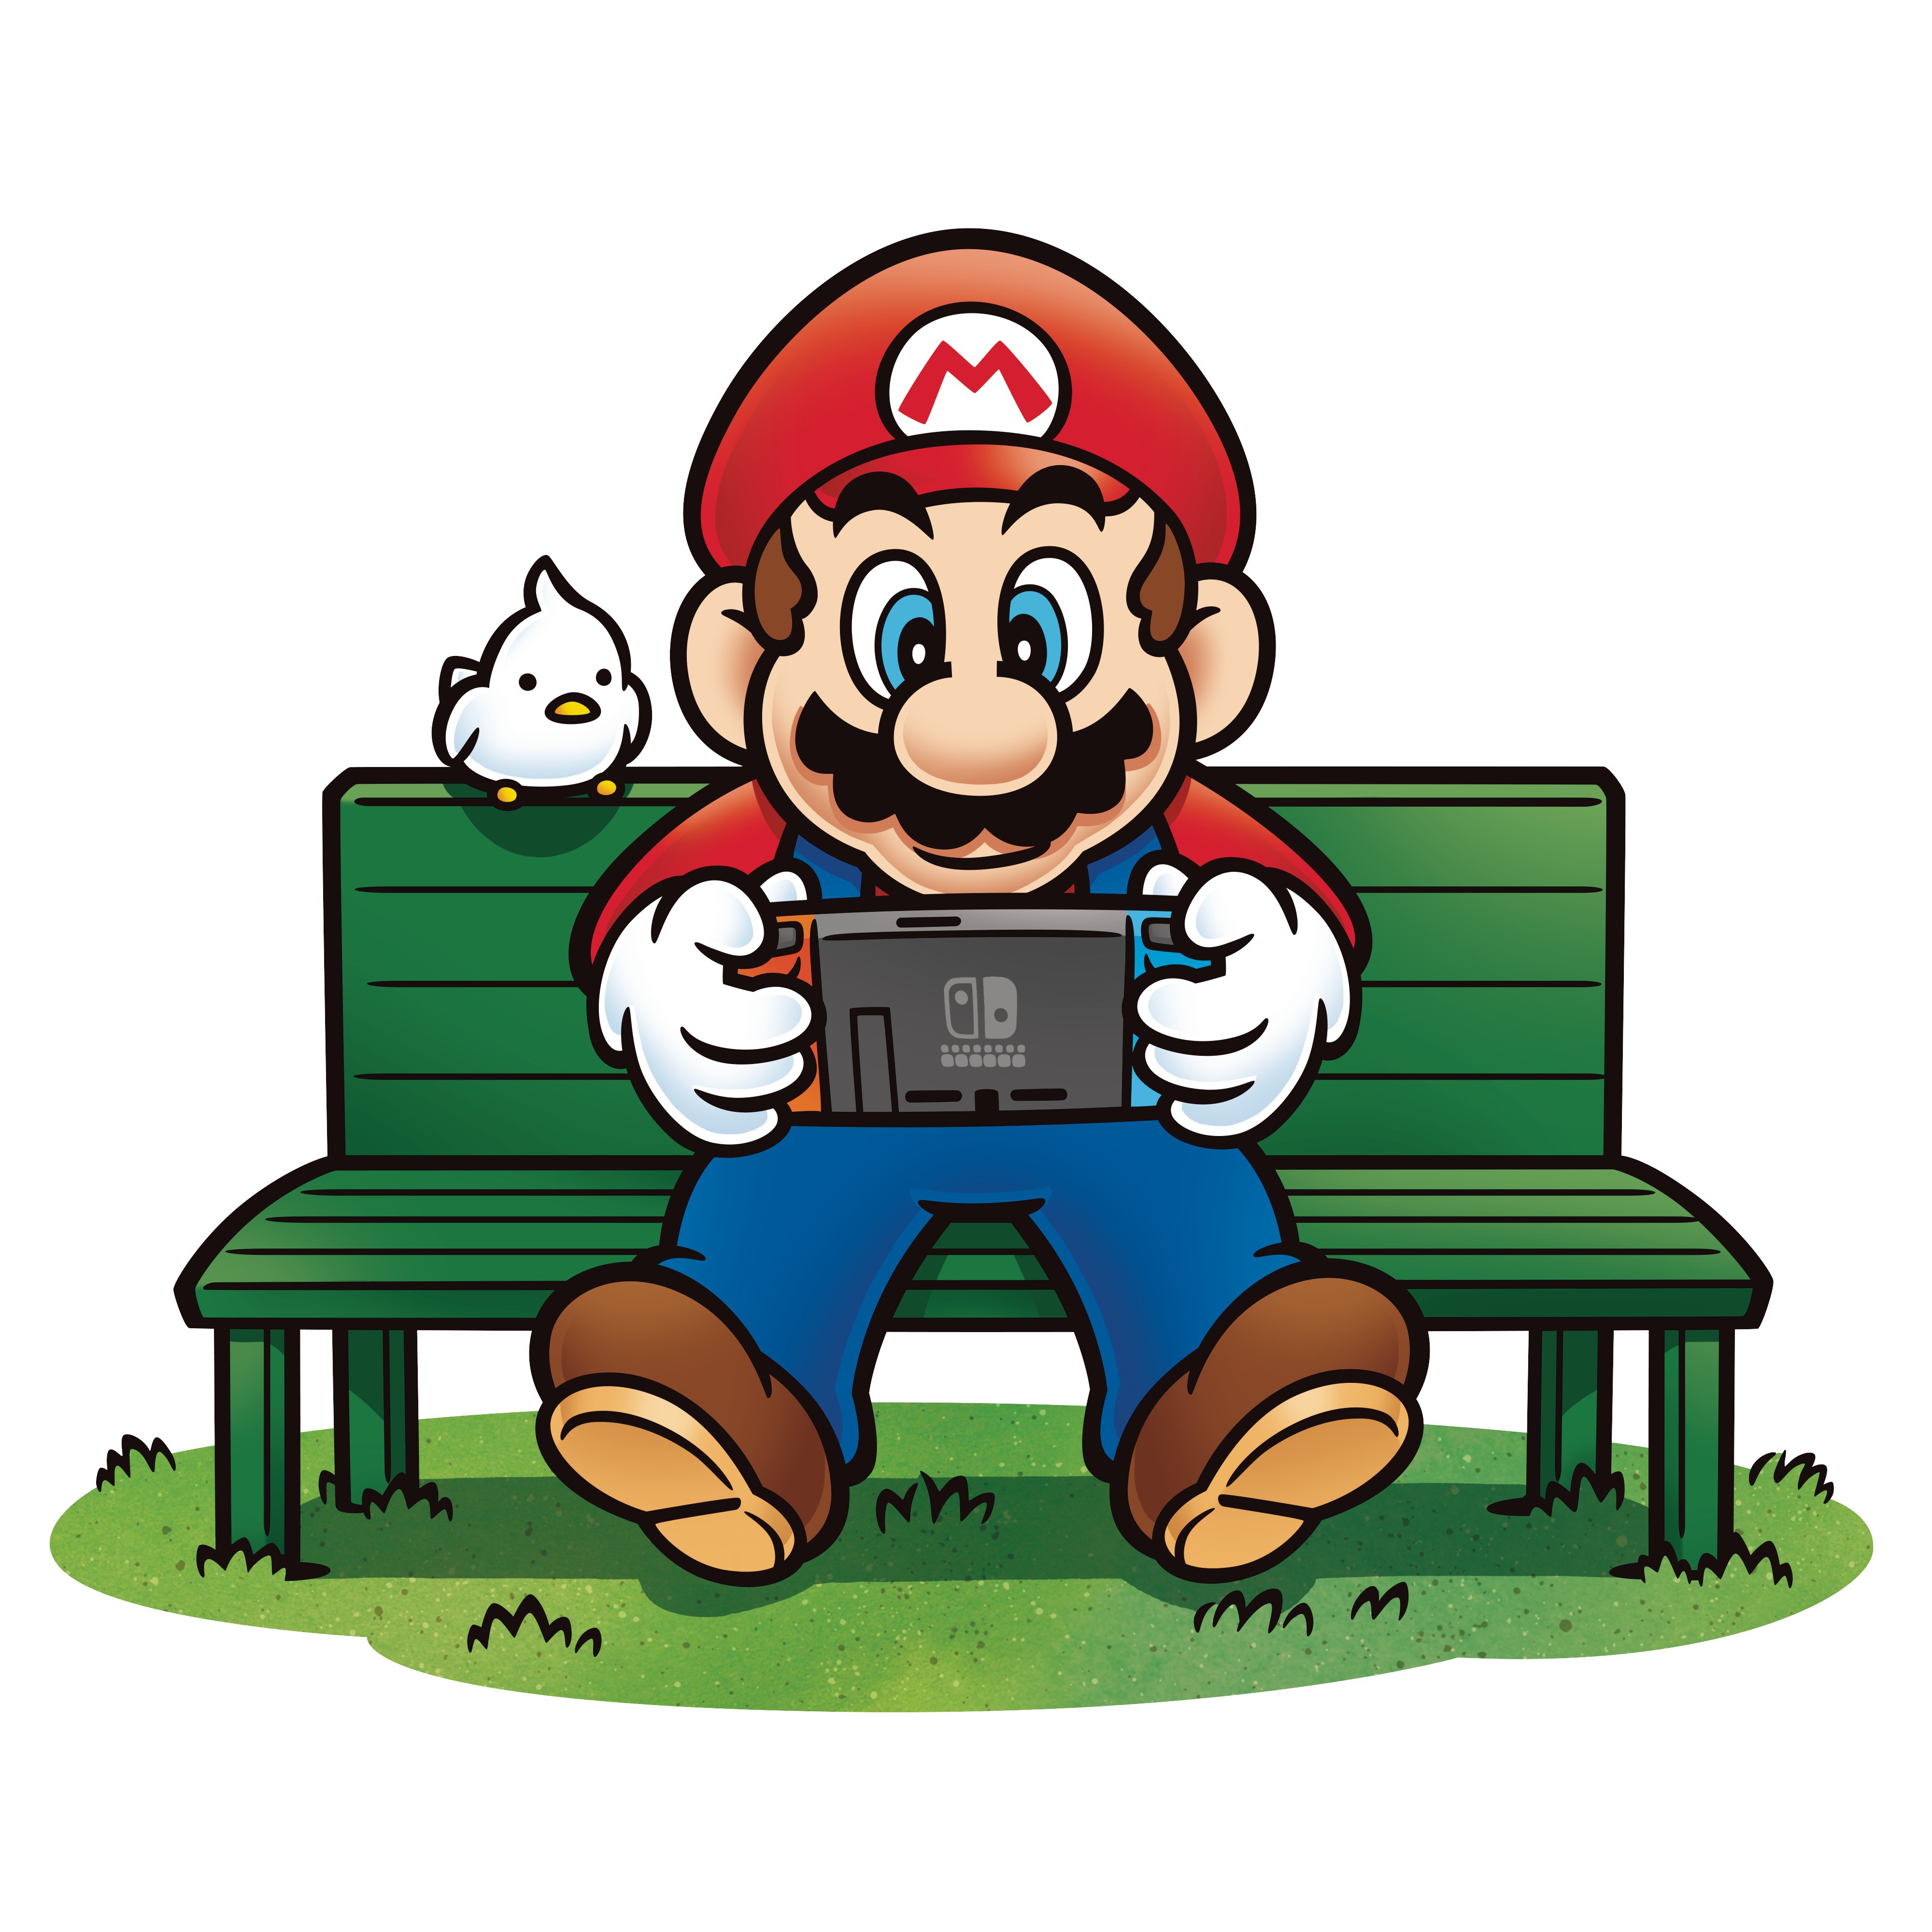 download super mario deluxe switch for free